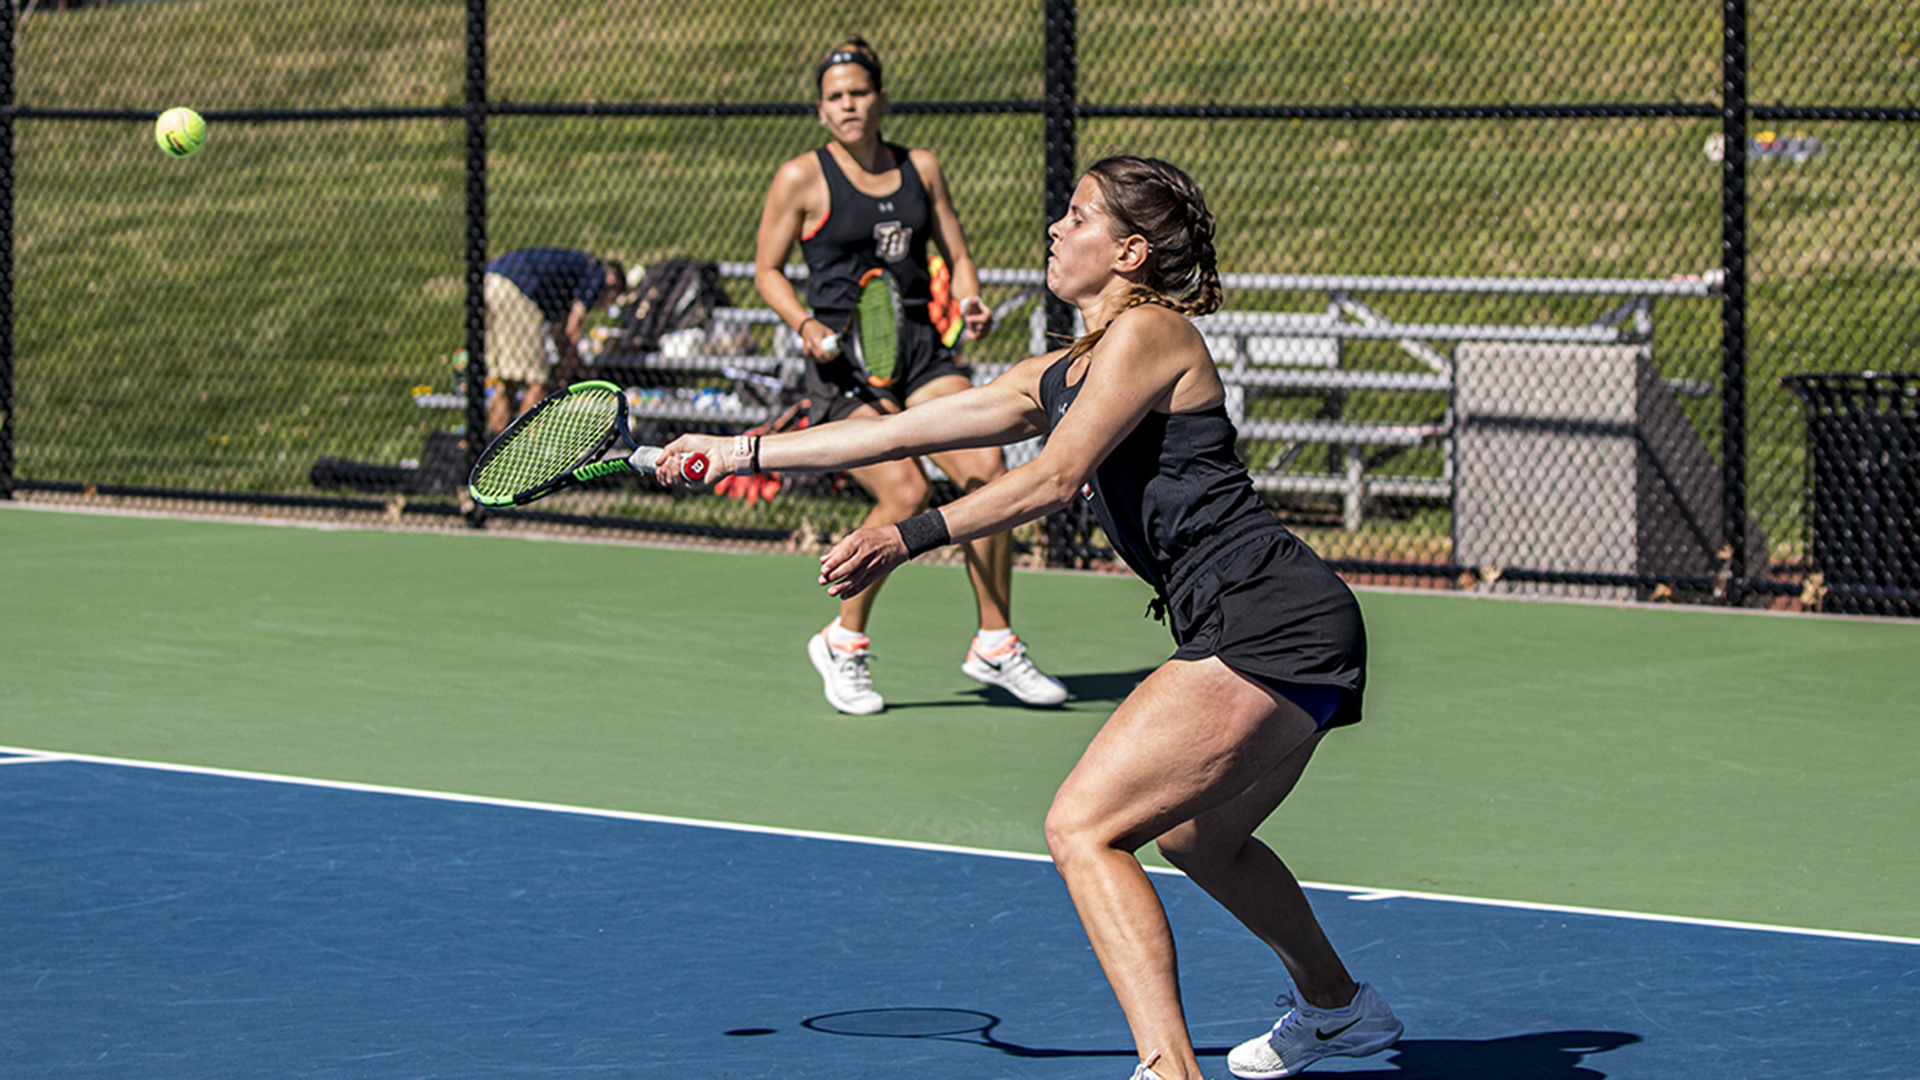 Caitlin (foreground) and Annie McCullough earned a doubles win for the Pioneers over Wingate (photo by Chuck Williams)